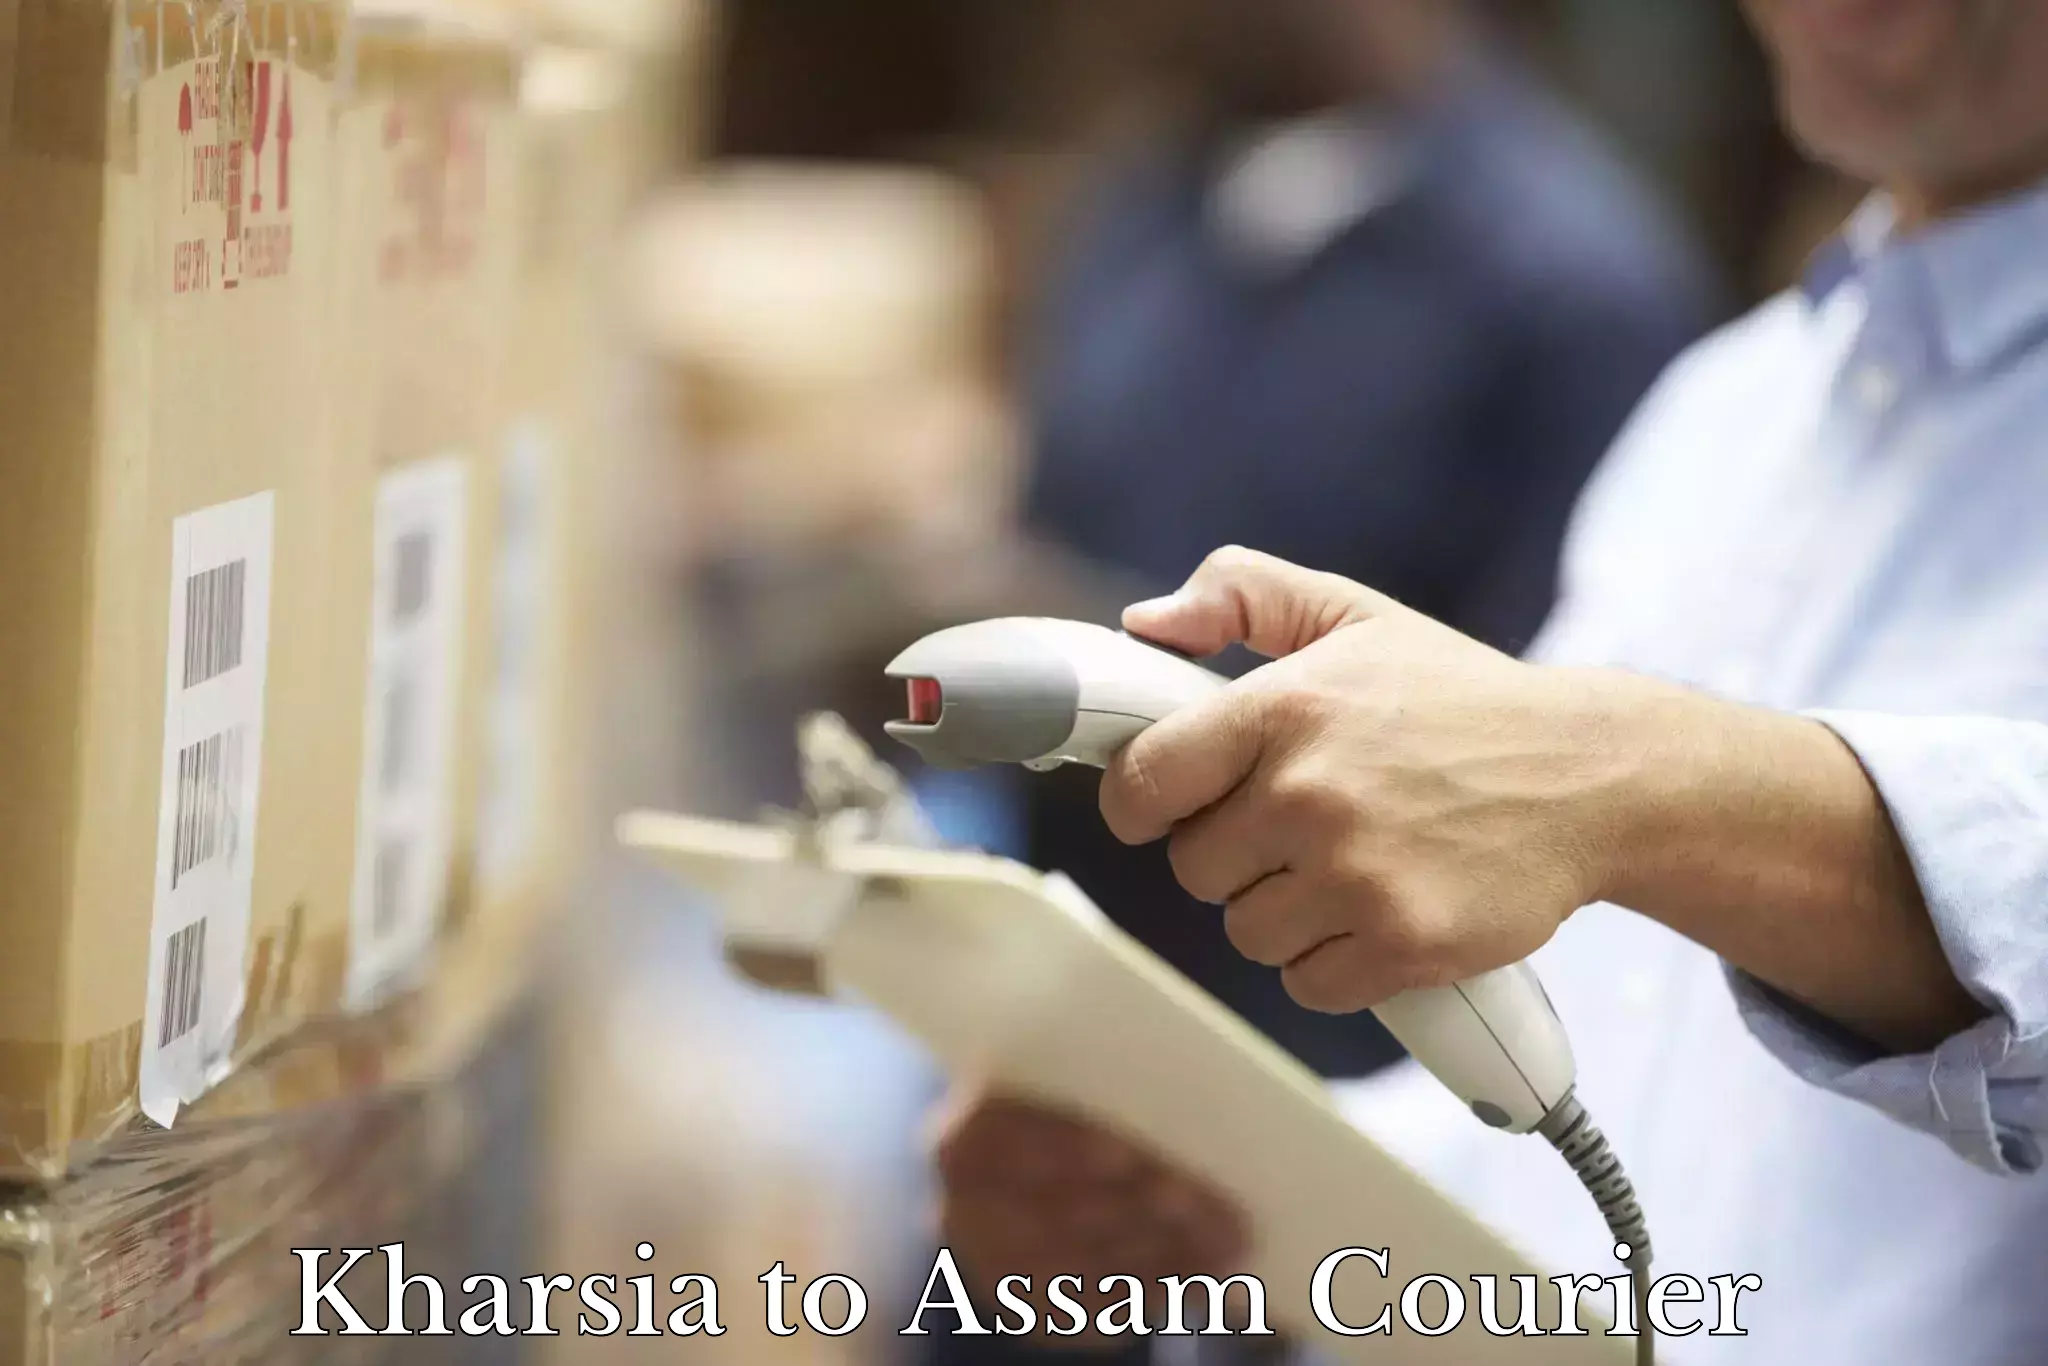 Courier service innovation Kharsia to Dibrugarh